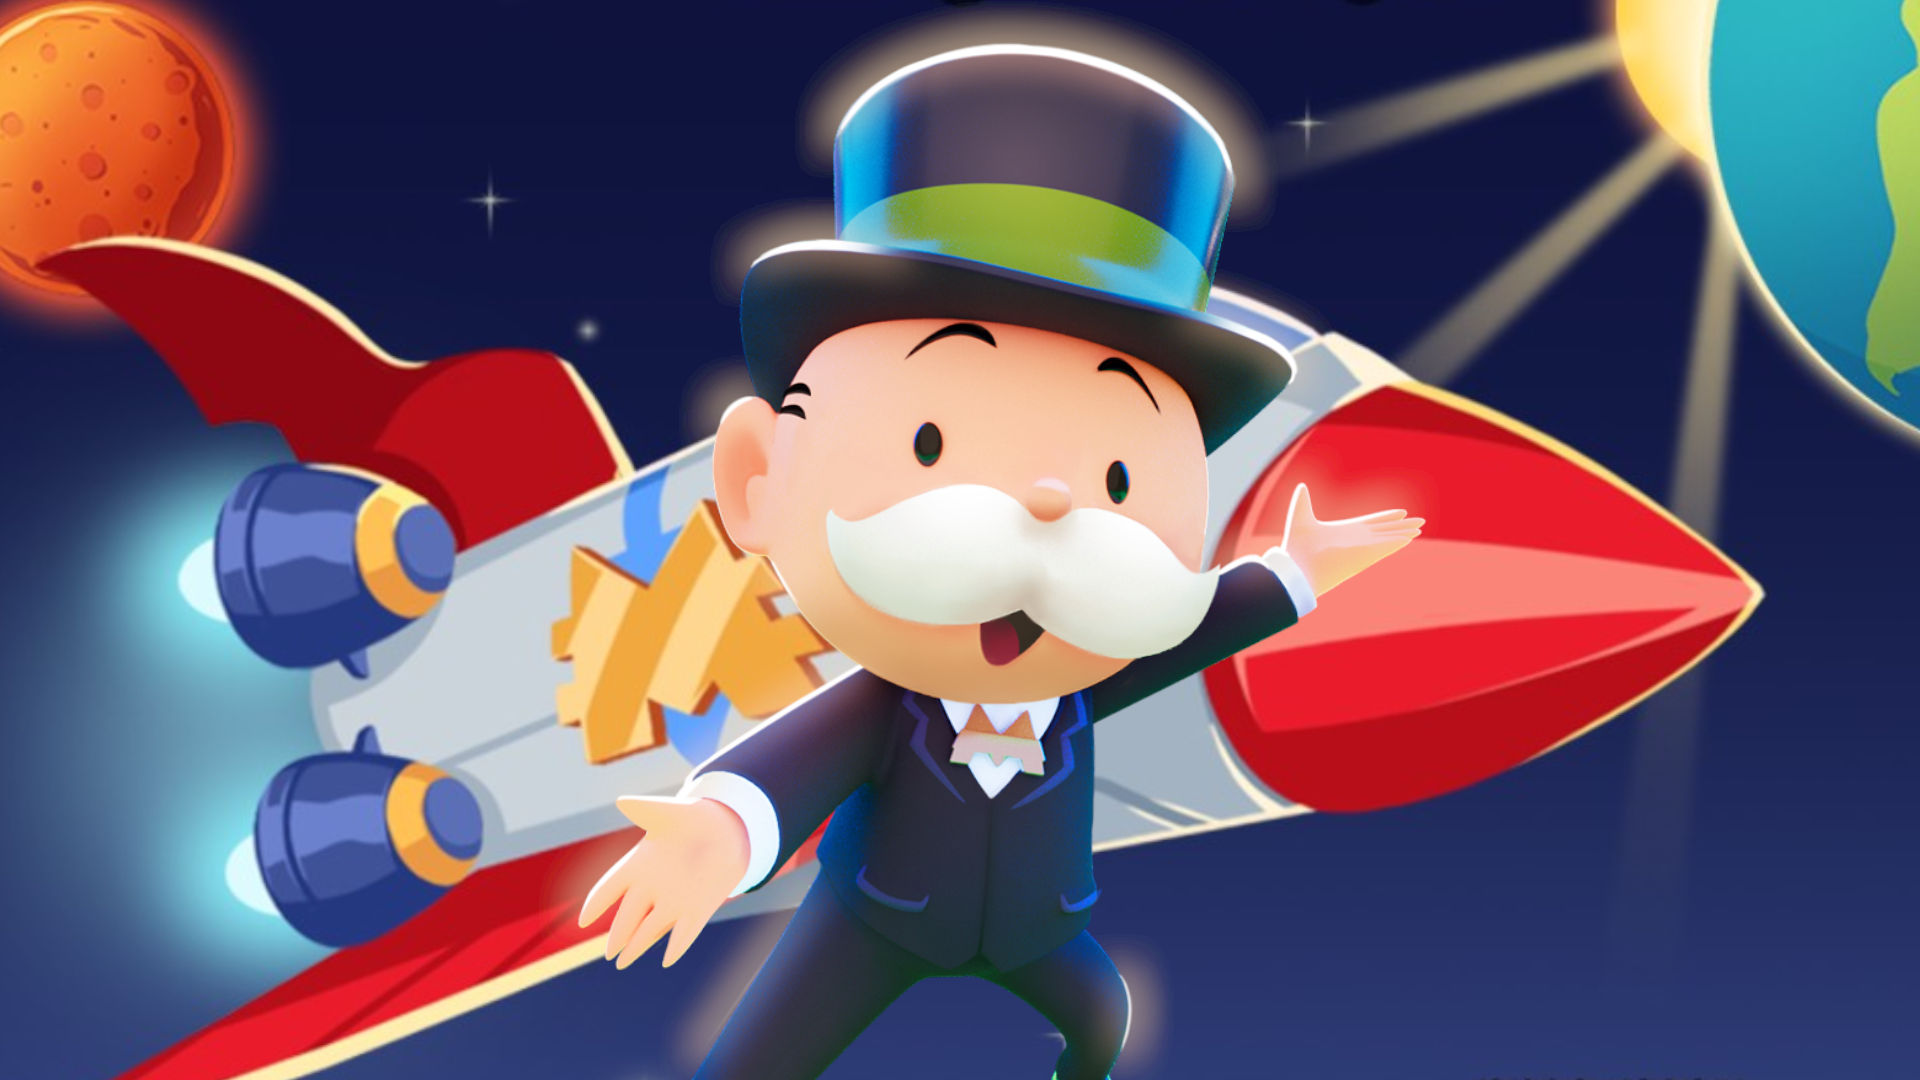 All the Monopoly Go Galactic Adventures rewards